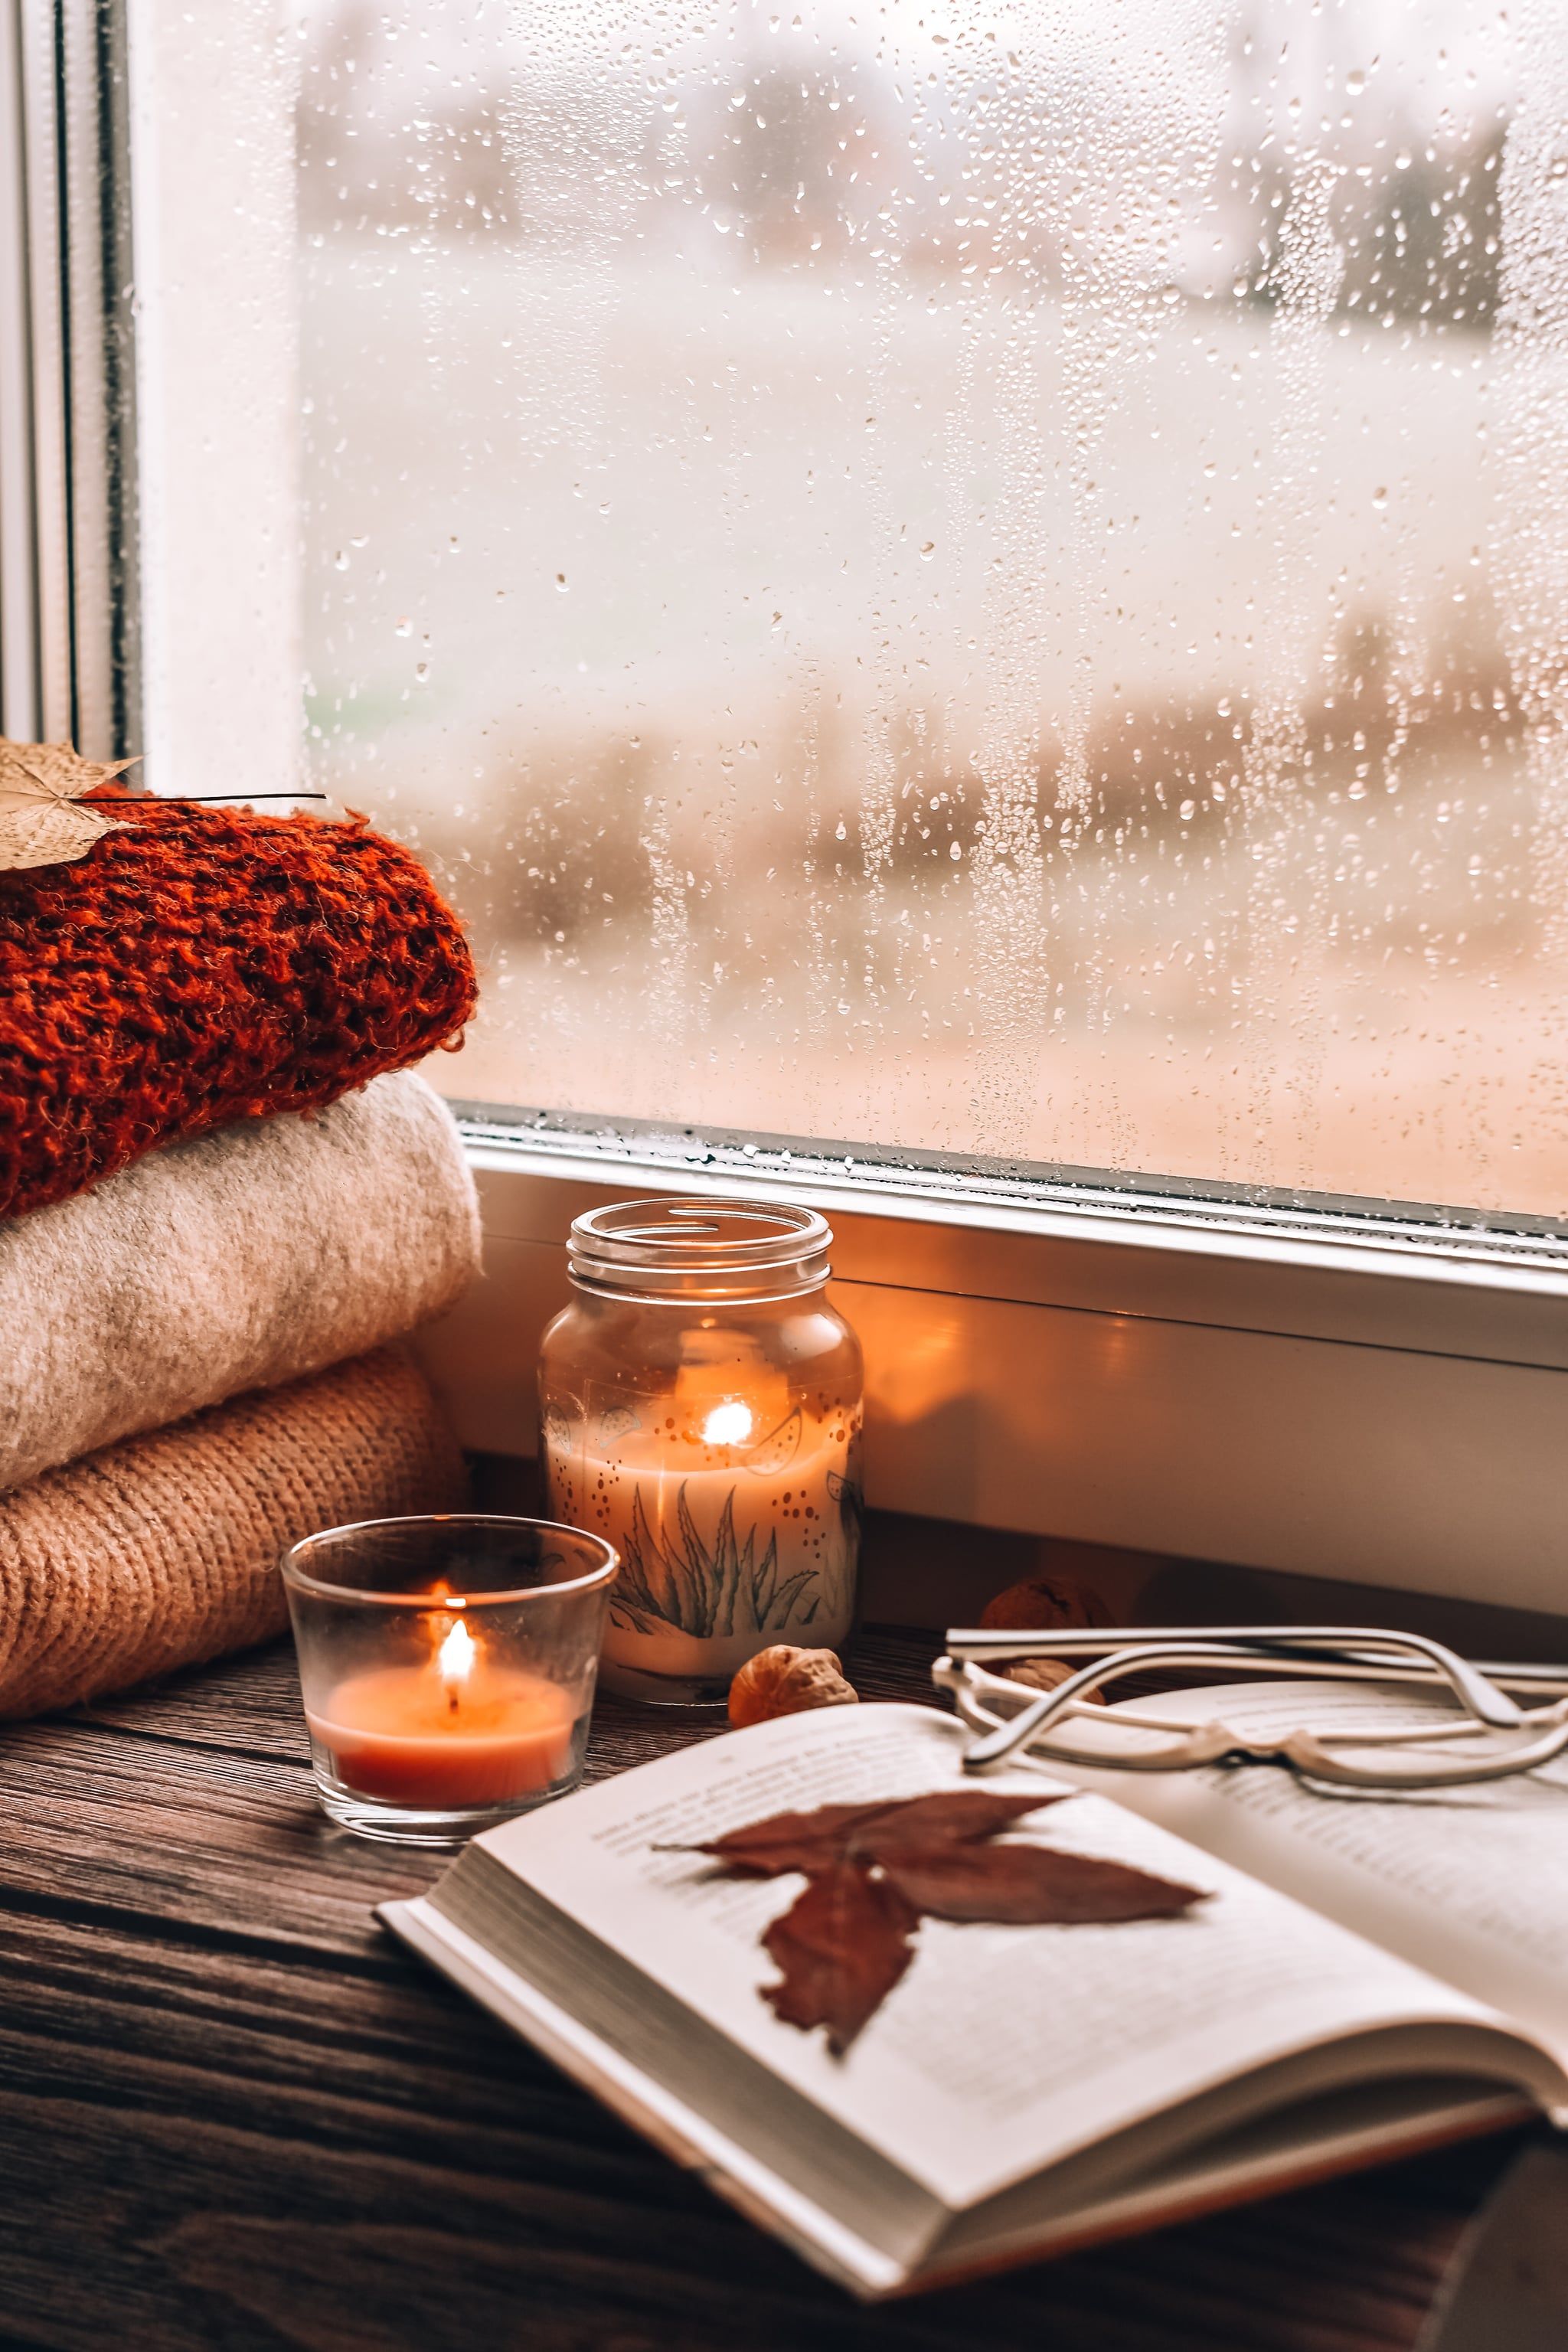 Fall Background: Rainy Day iPhone Wallpaper Fall iPhone Wallpaper That'll Instantly Make You Feel Cozy